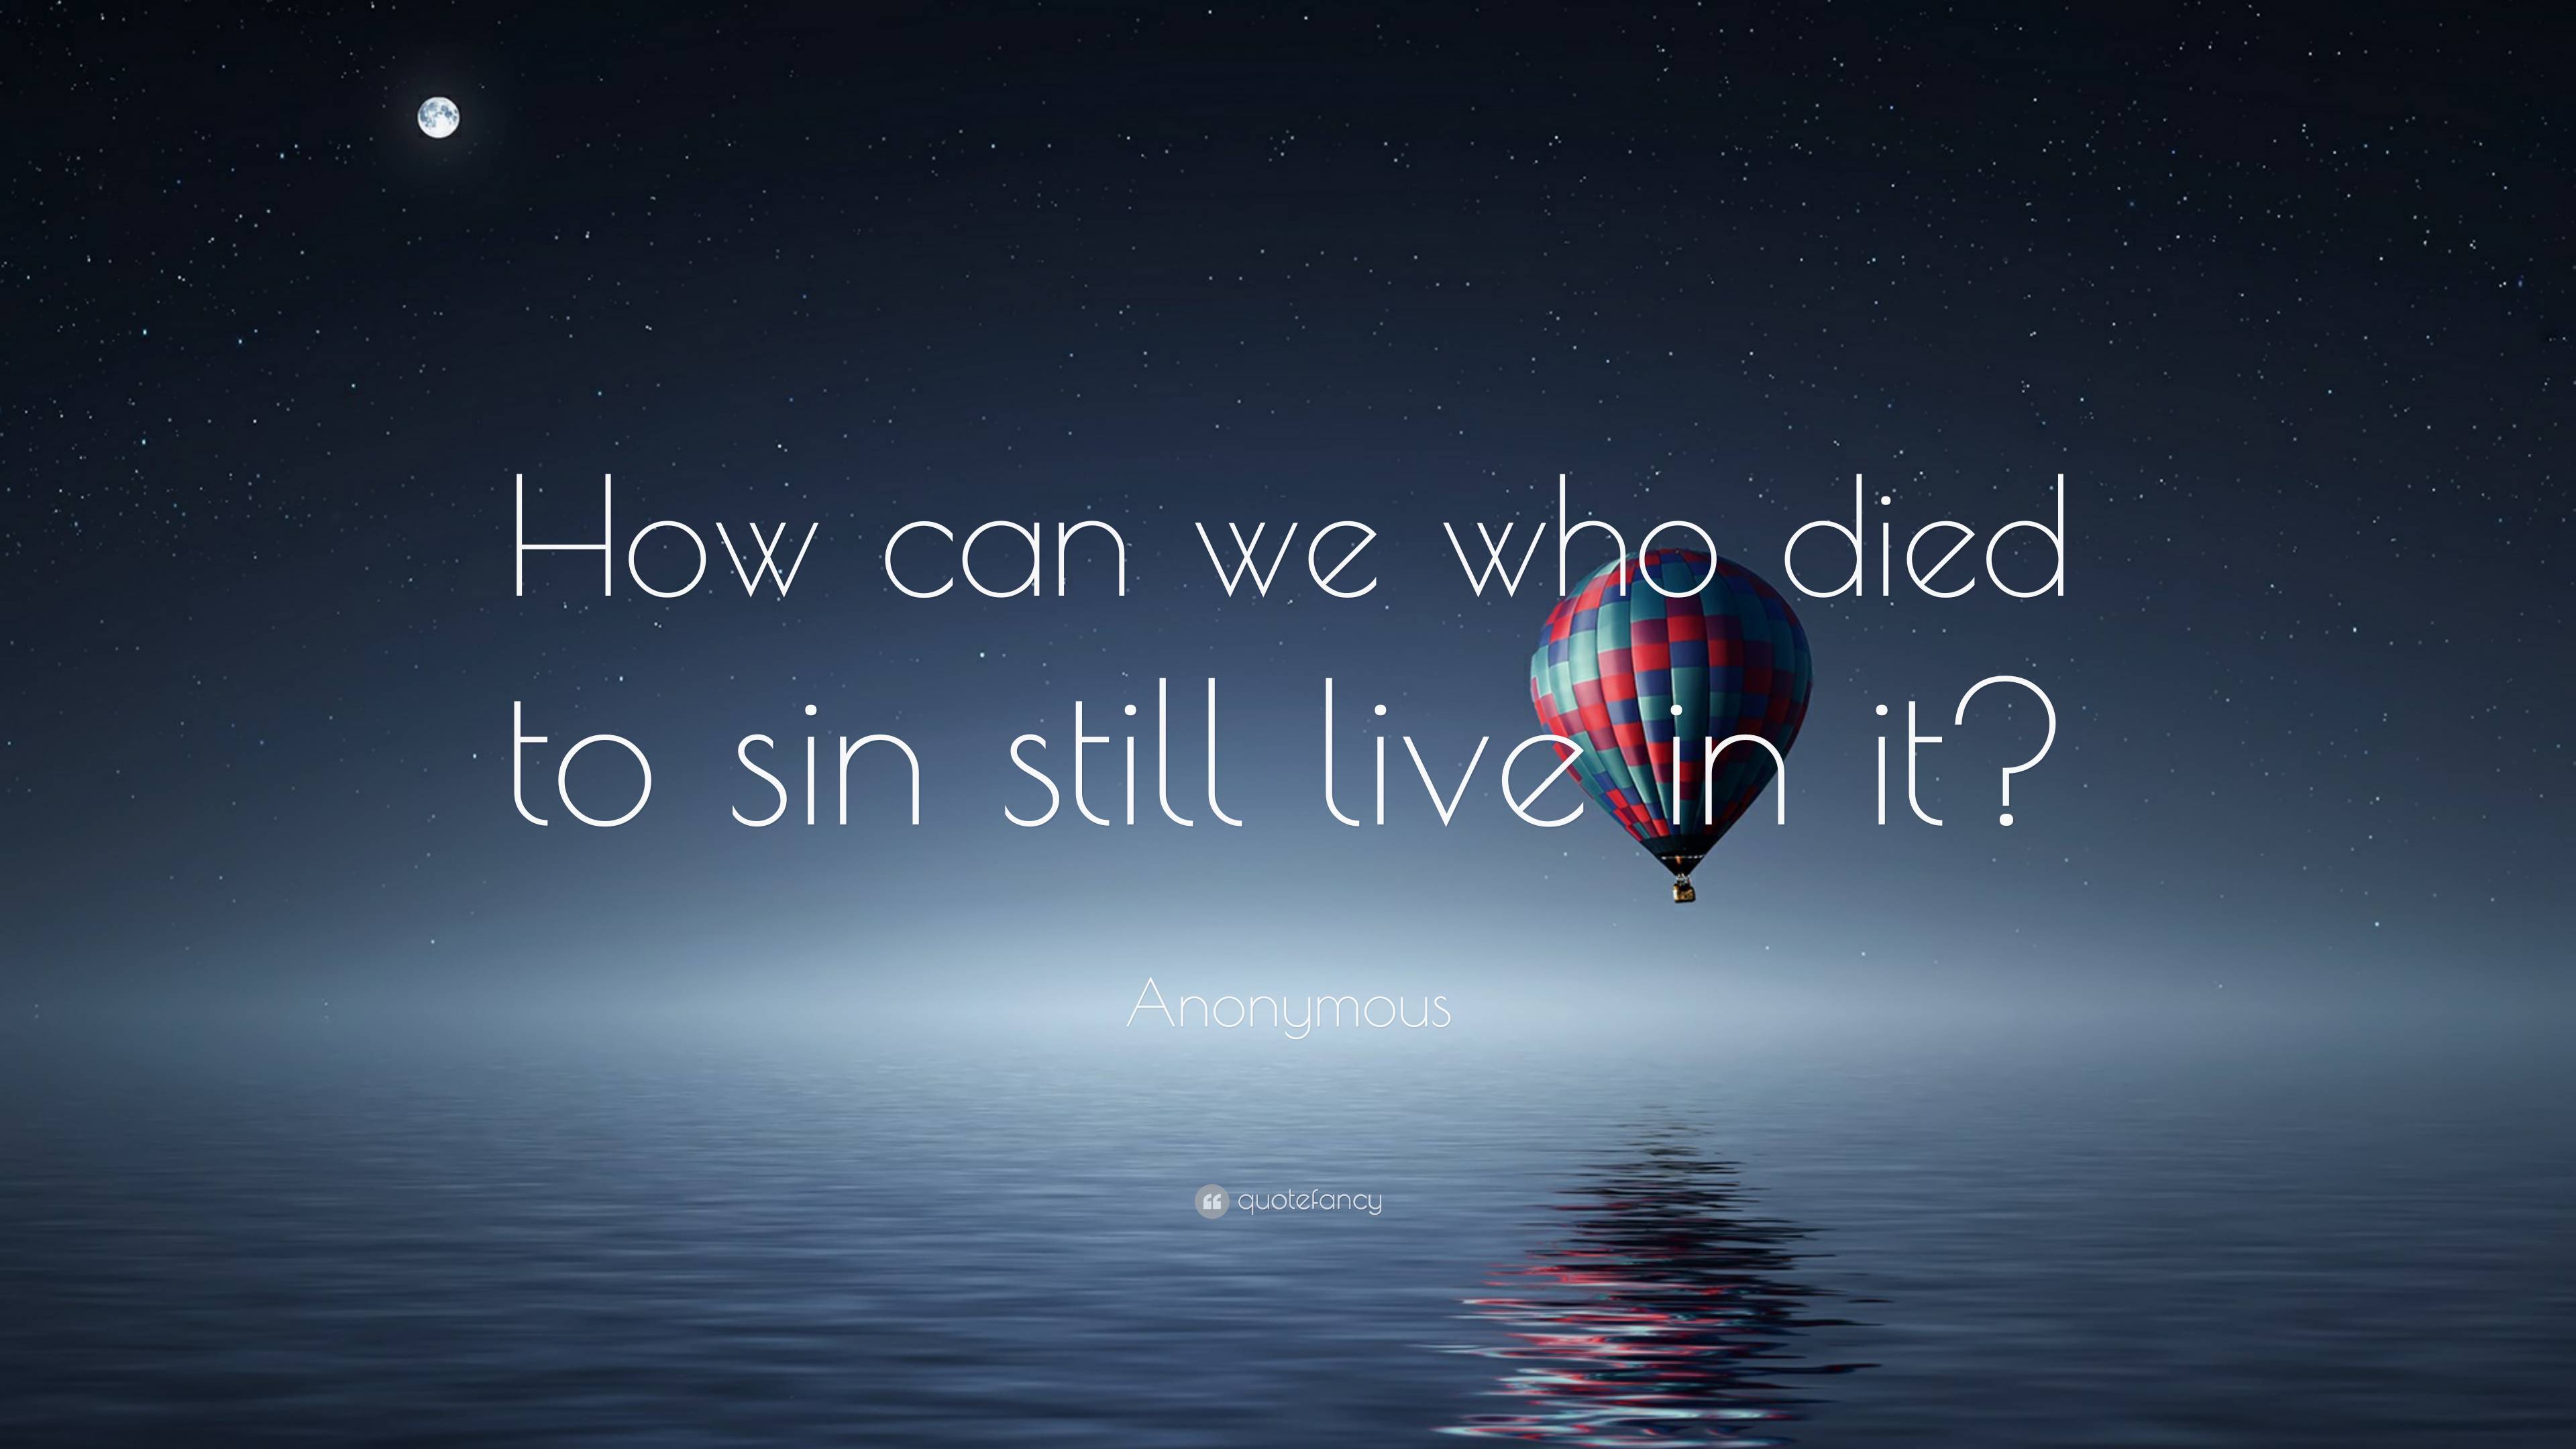 Anonymous Quote: “How can we who died to sin still live in it?”